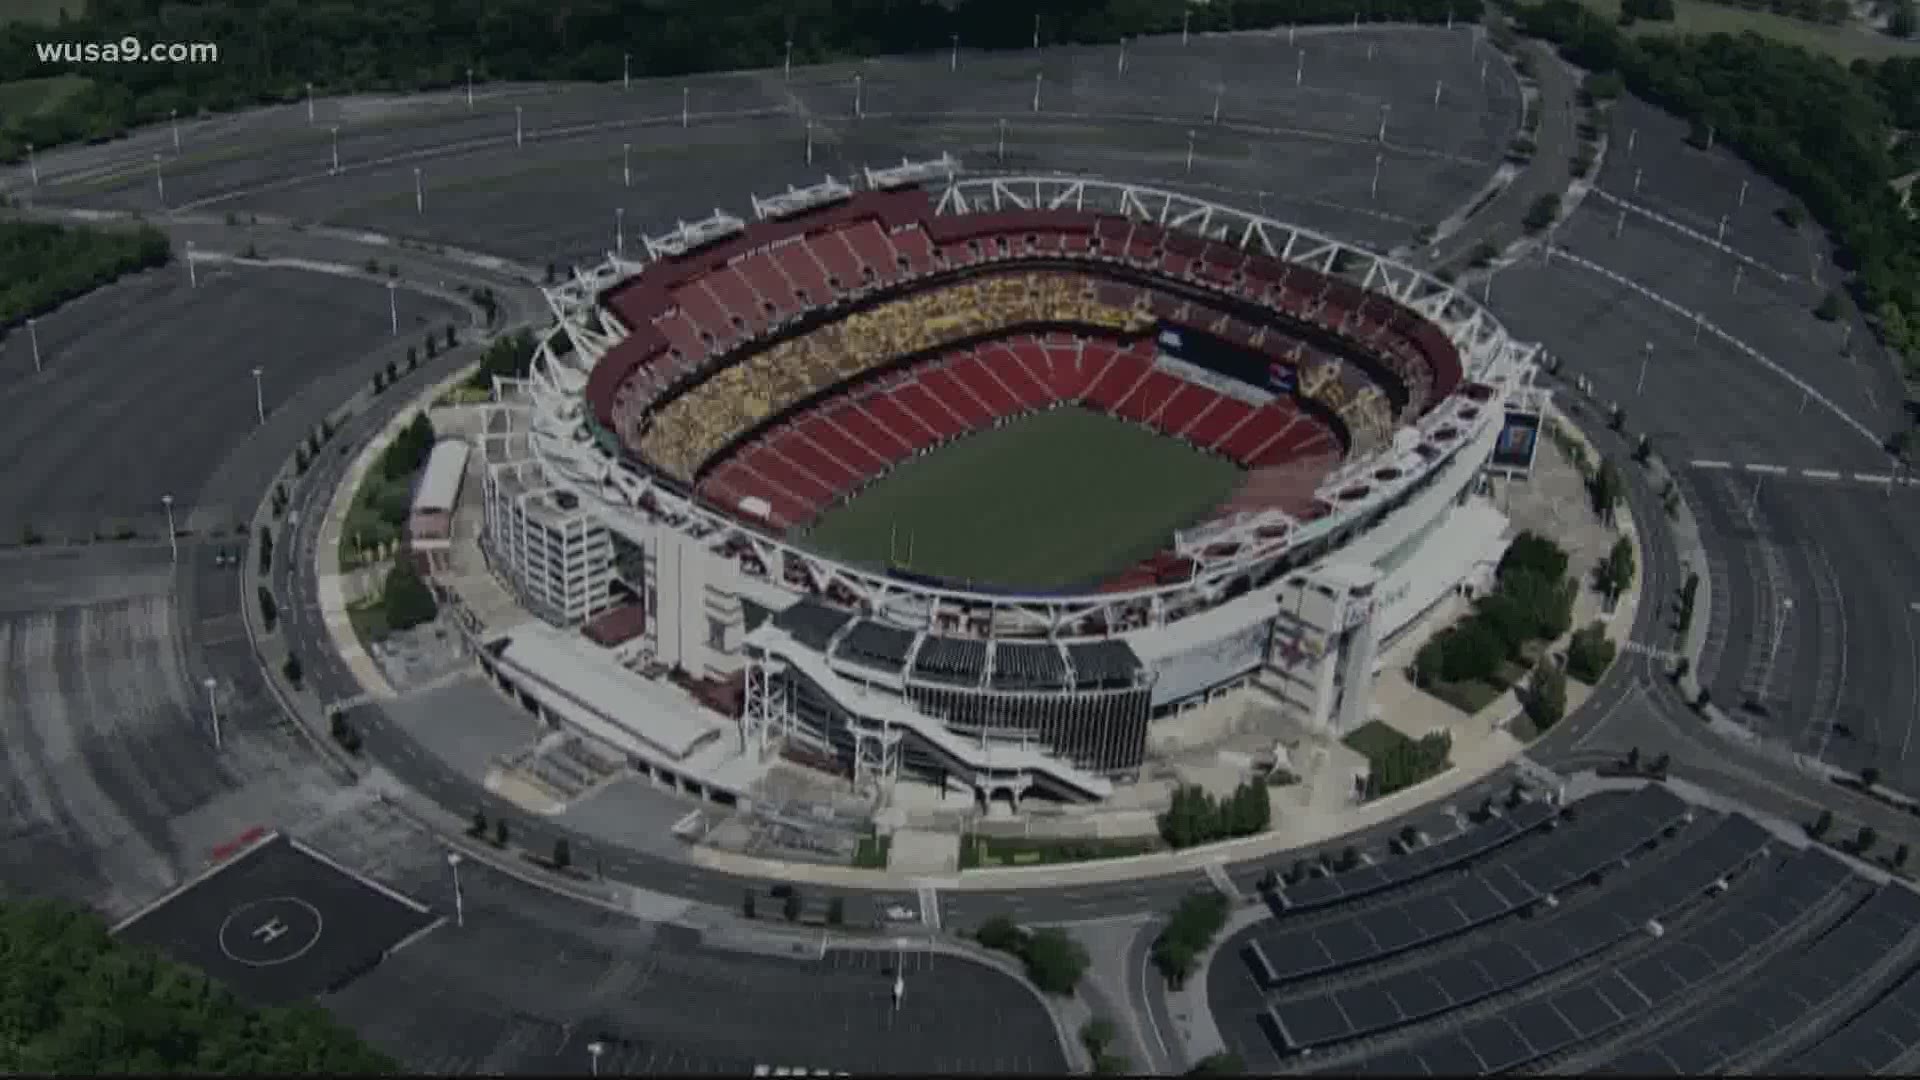 The team announced fan-less games at FedEx Field, citing health and safety concerns.